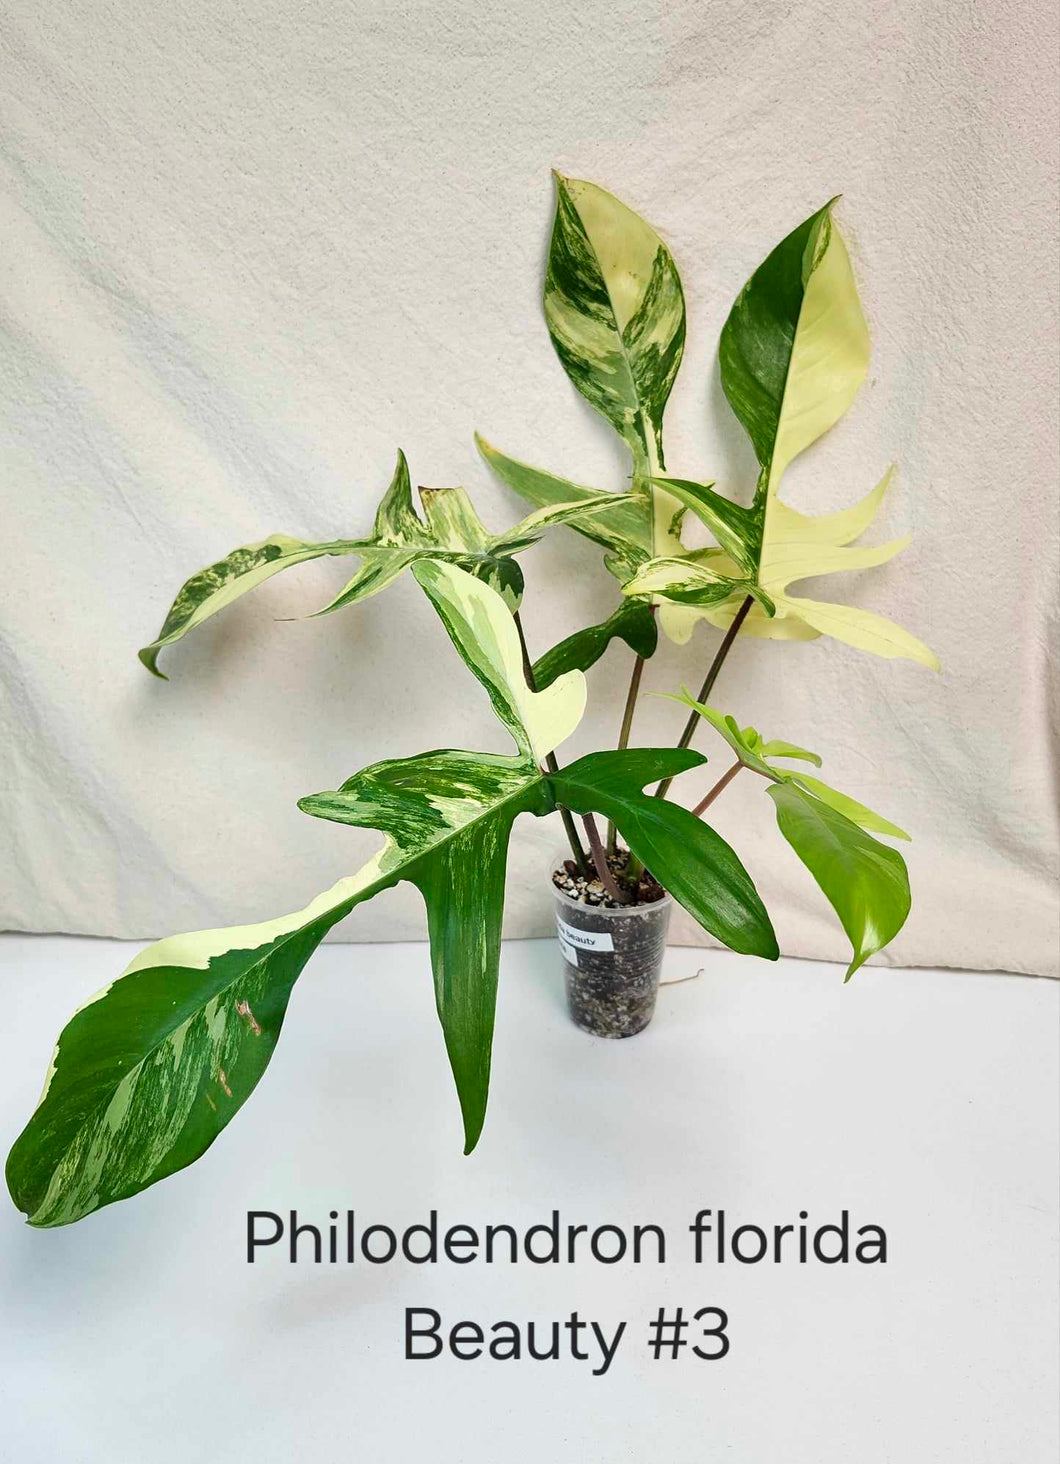 Philodendron florida beauty #3